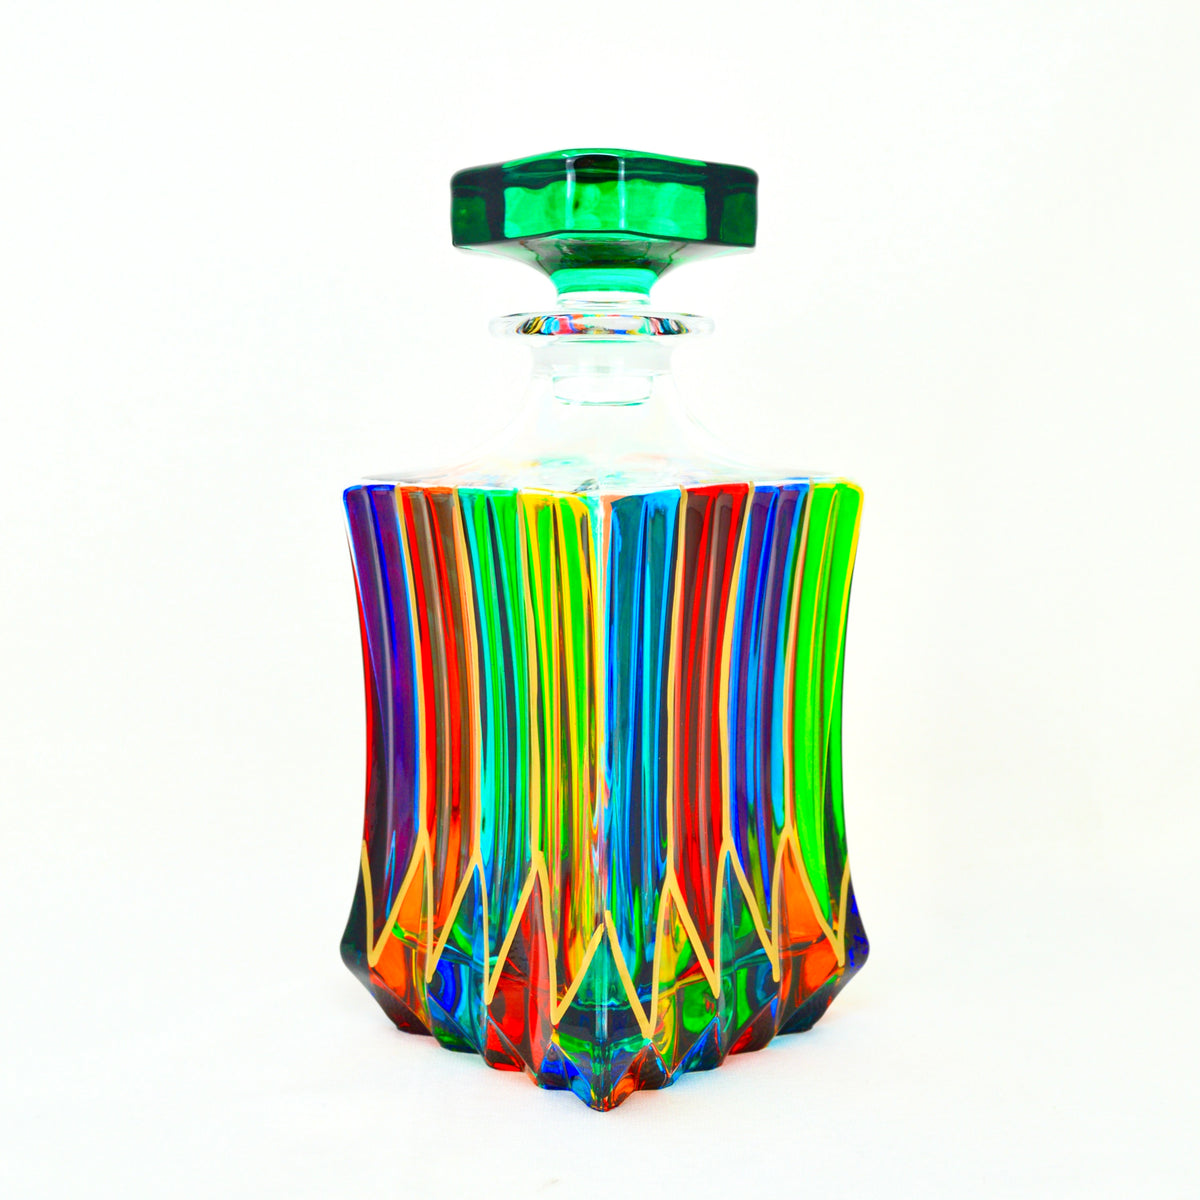 Swatch Decanter, Hand-Painted Italian Crystal, Made in Italy - My Italian Decor